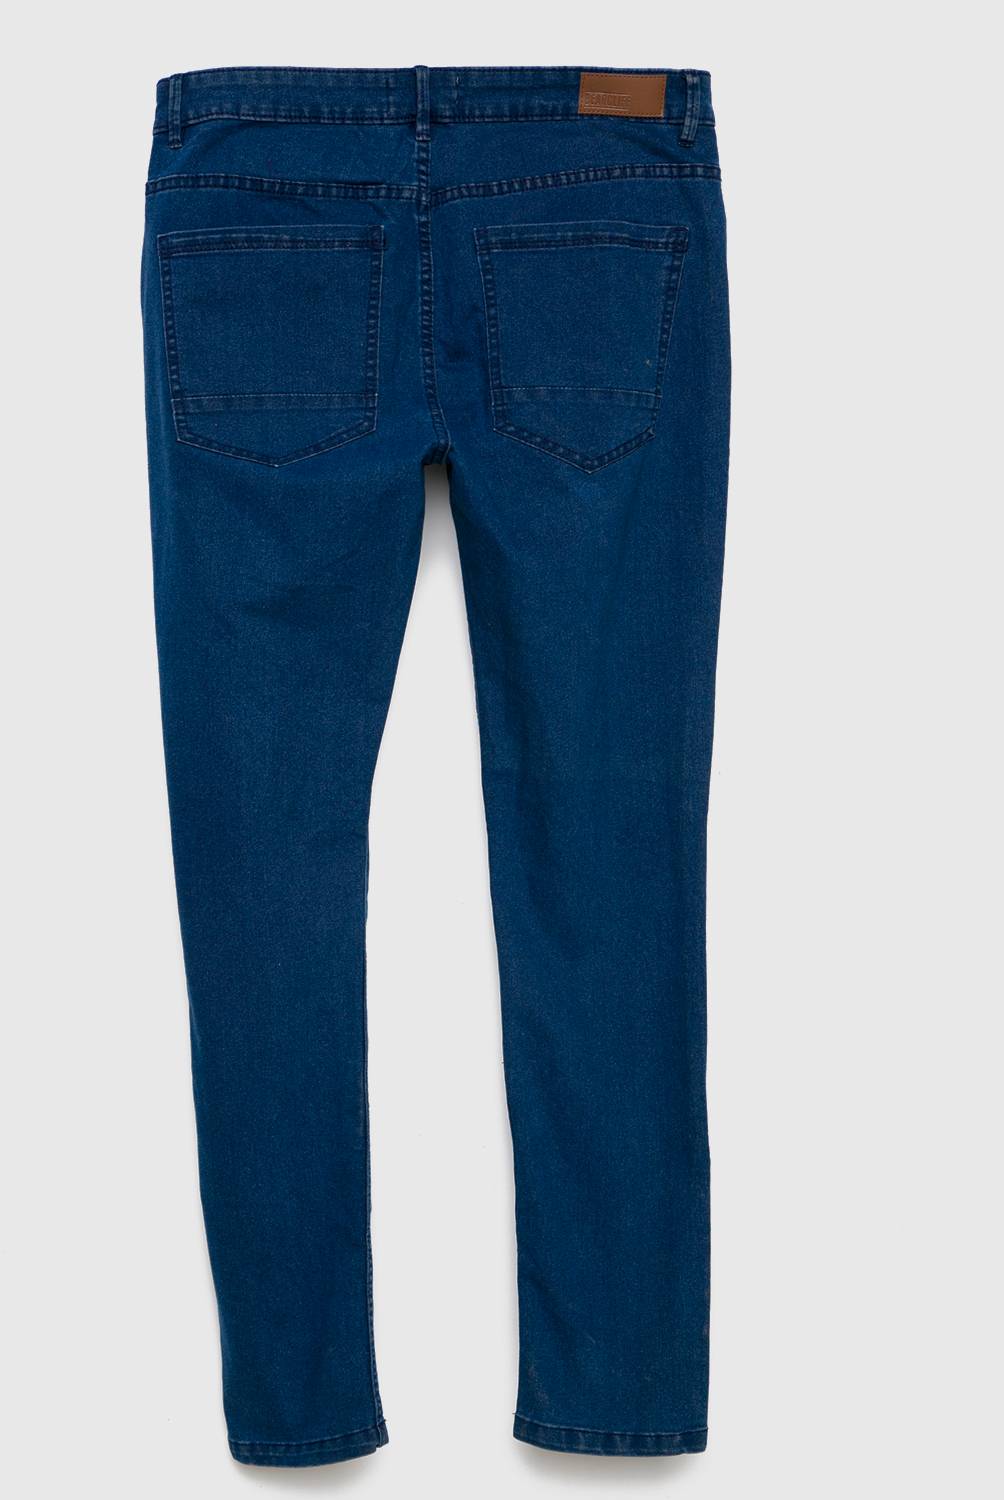 BEARCLIFF - Bearcliff Jeans Super Skinny Fit Hombre